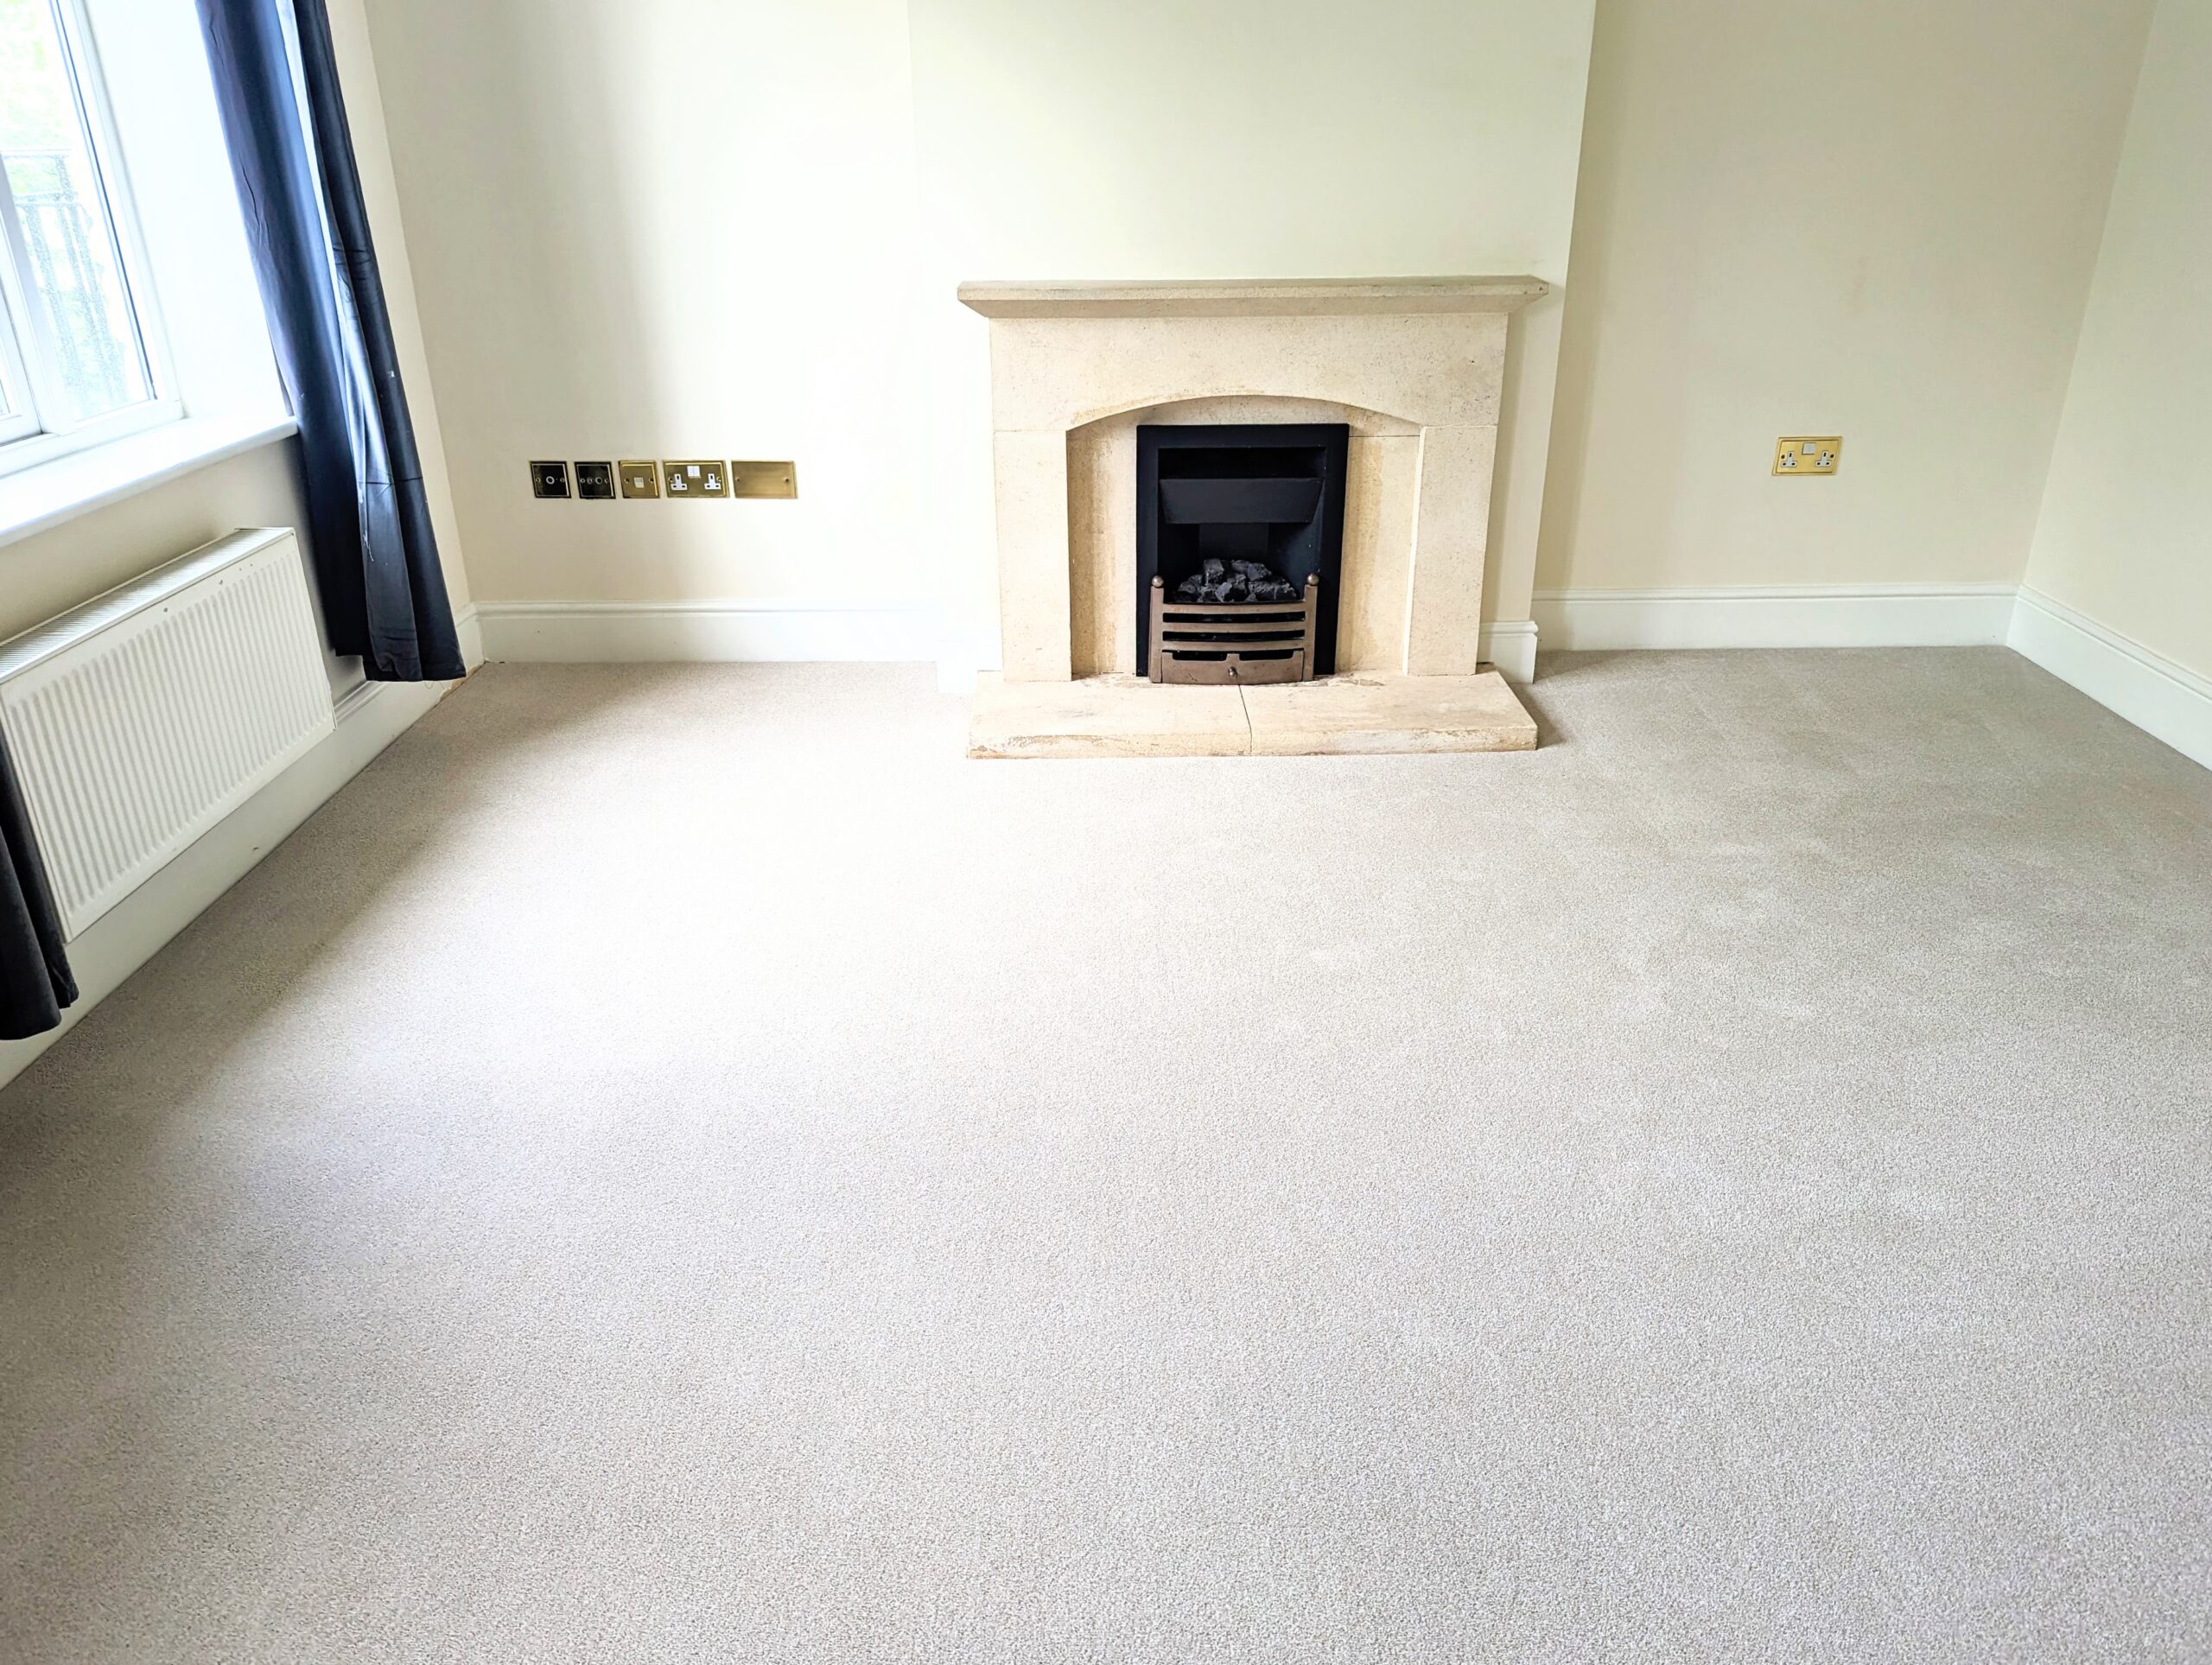 Do I need to steam clean carpets at end of tenancy?